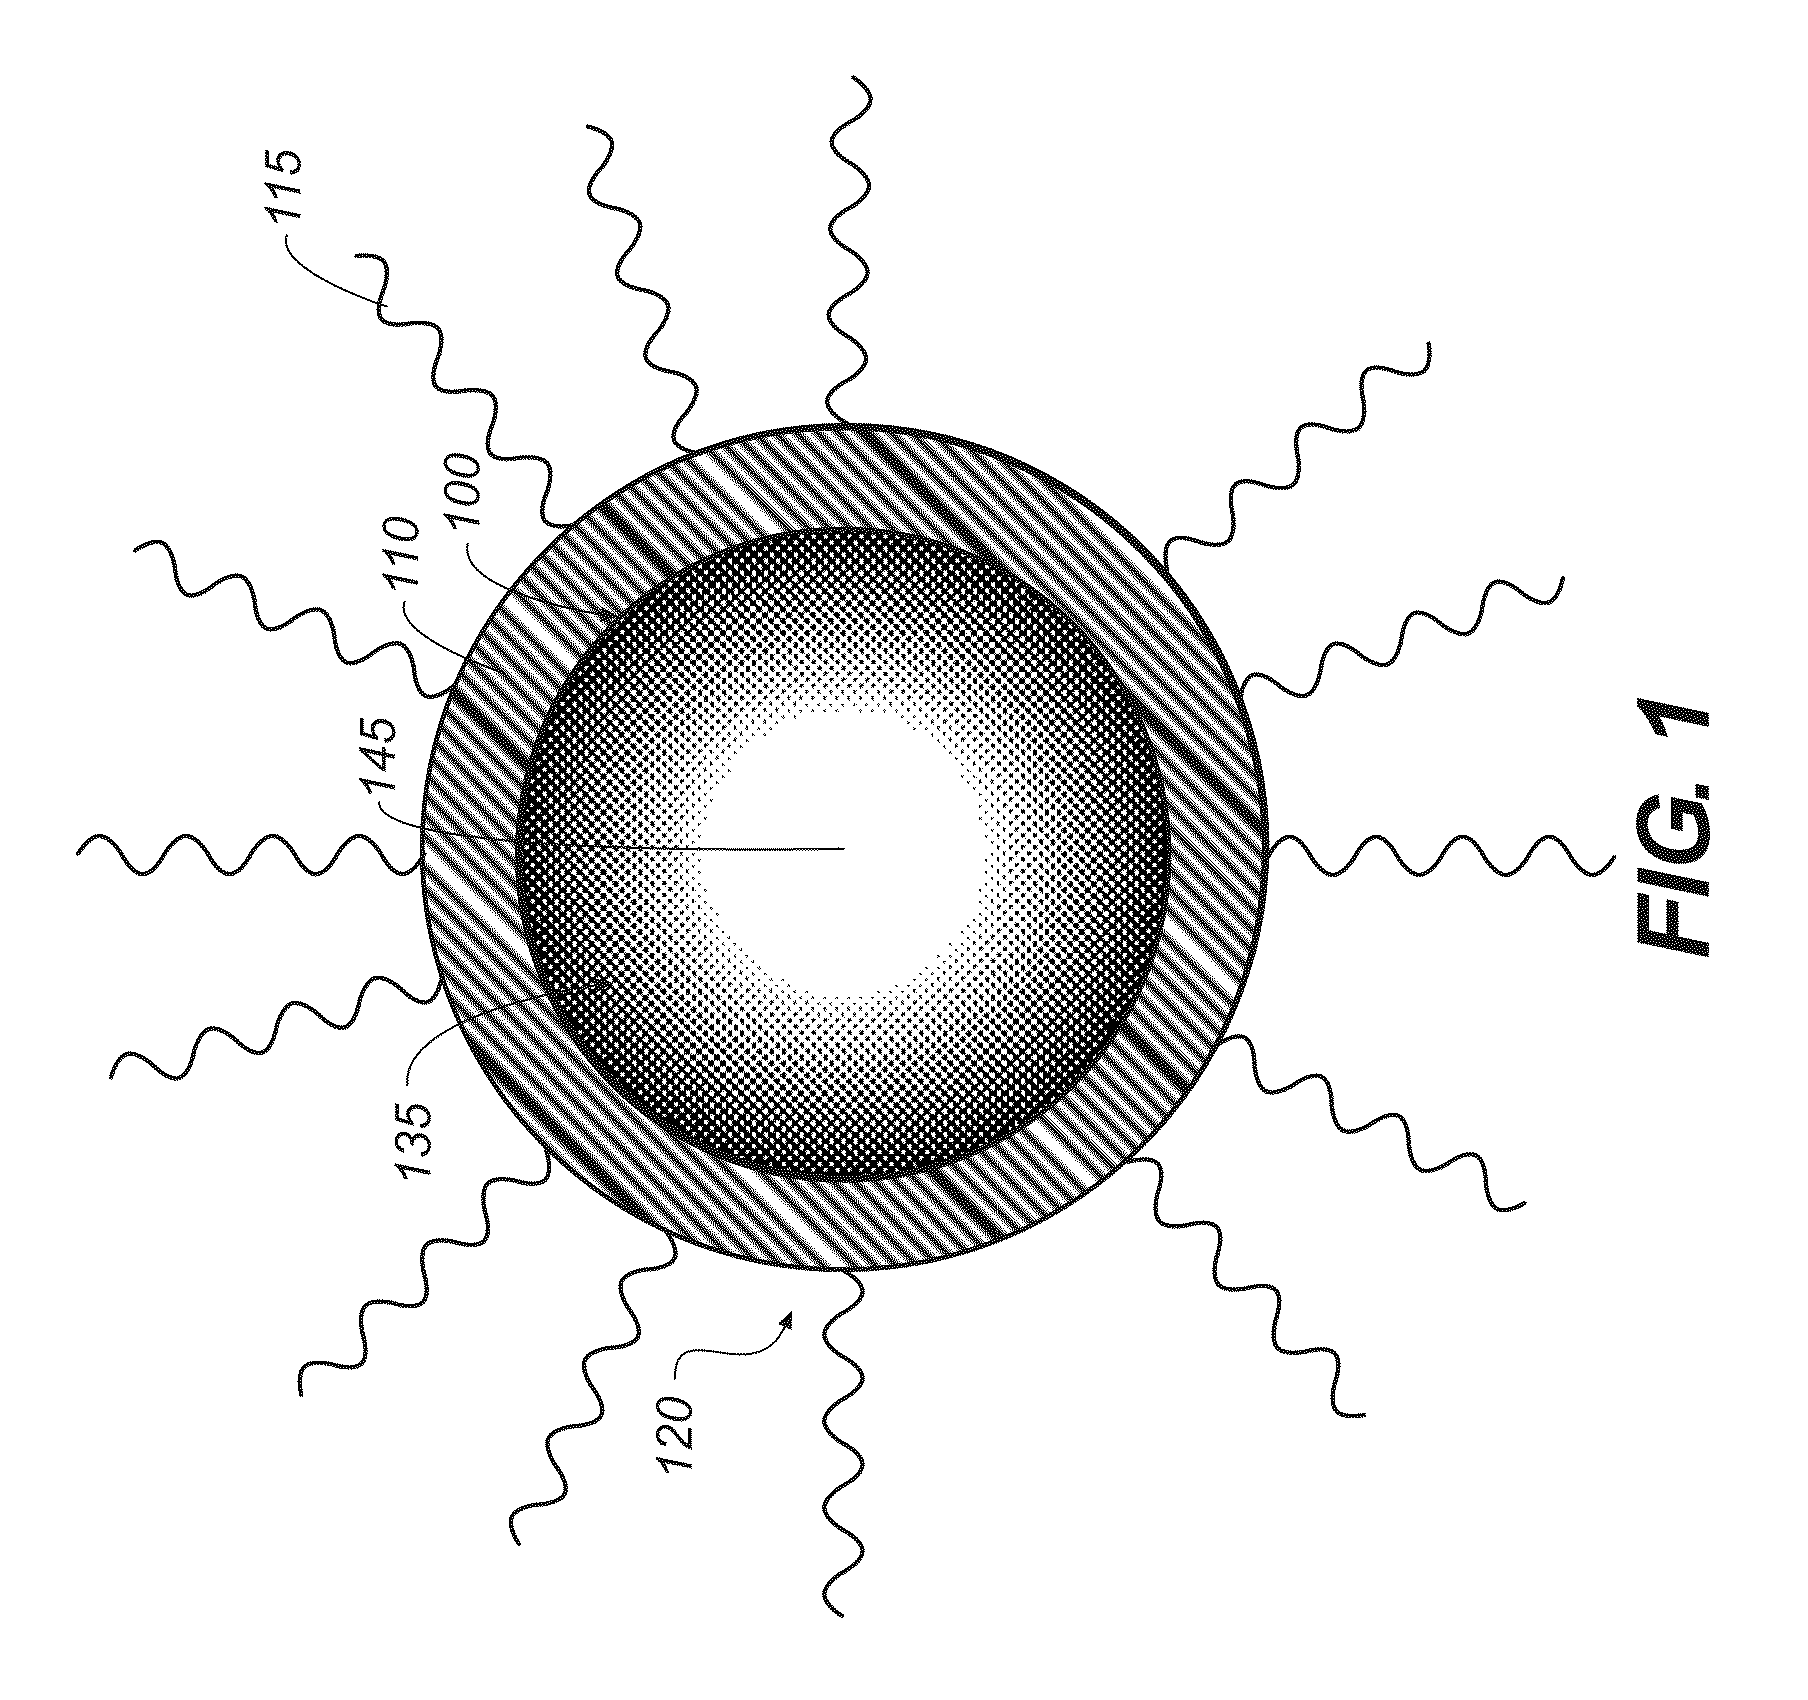 Device containing non-blinking quantum dots